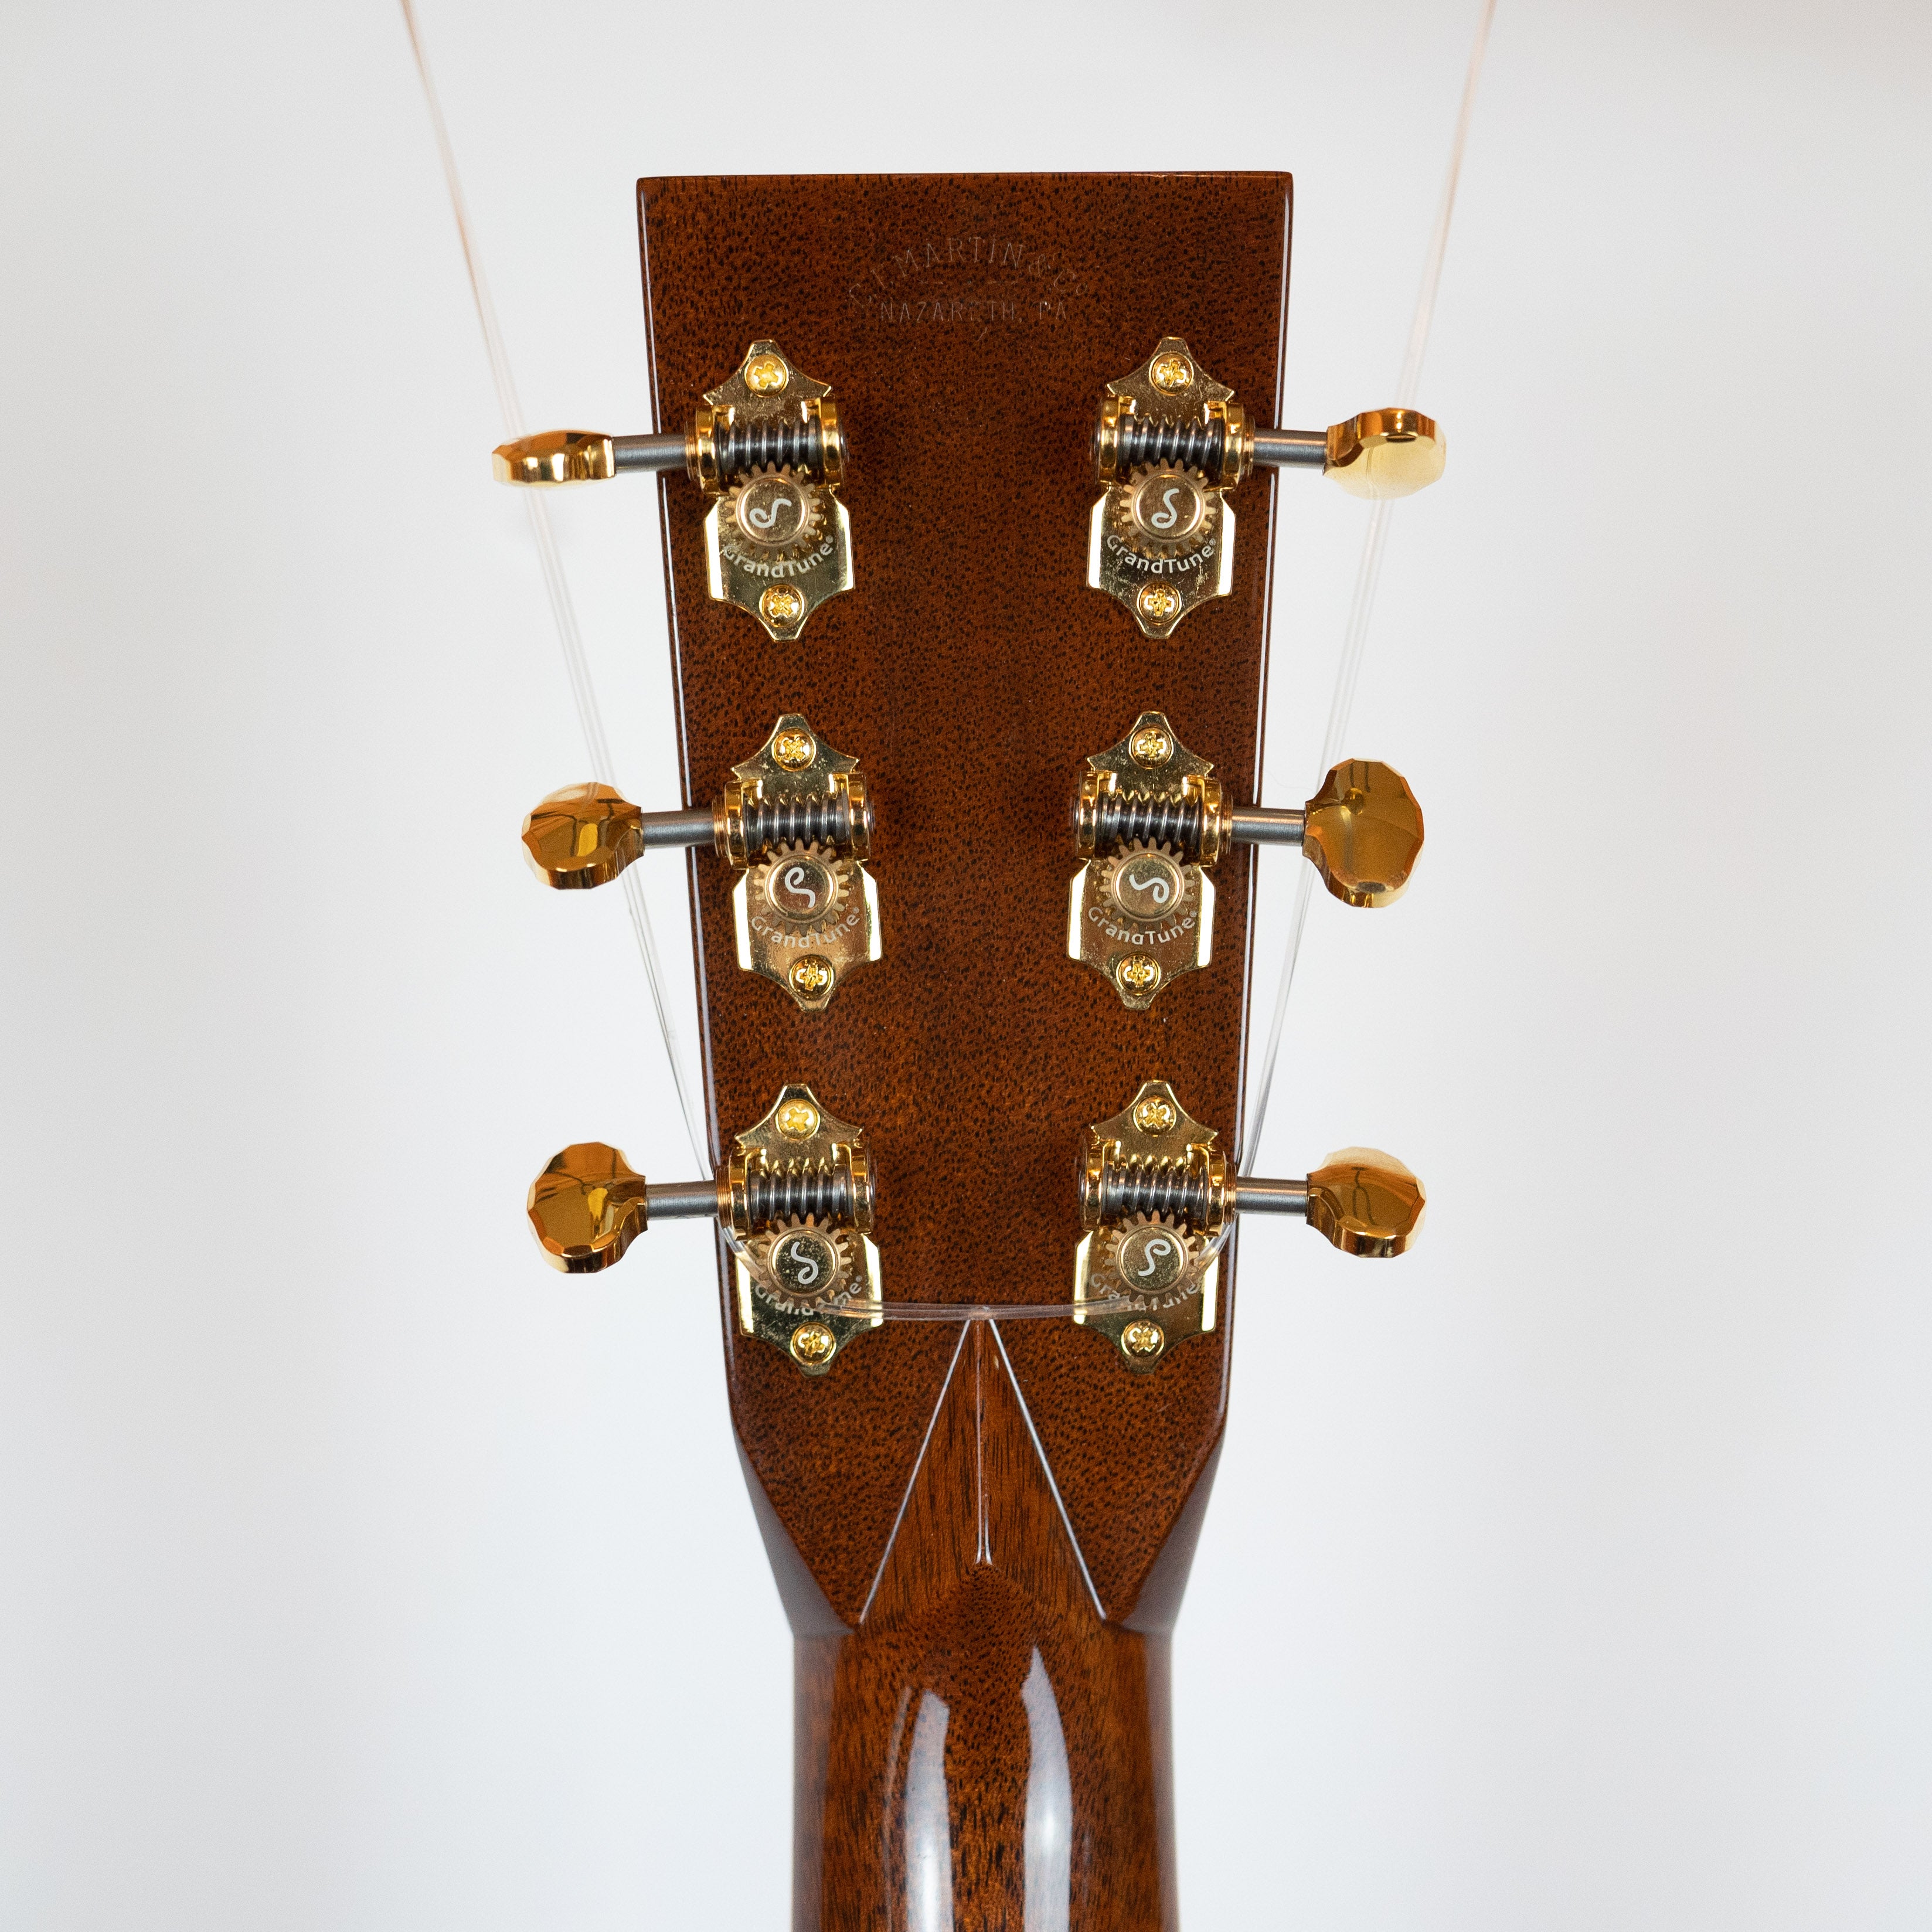 Martin 2018 Rudy's 40th Anniversary OM Cocobolo #6 (signed by Rudy and Chris Martin)